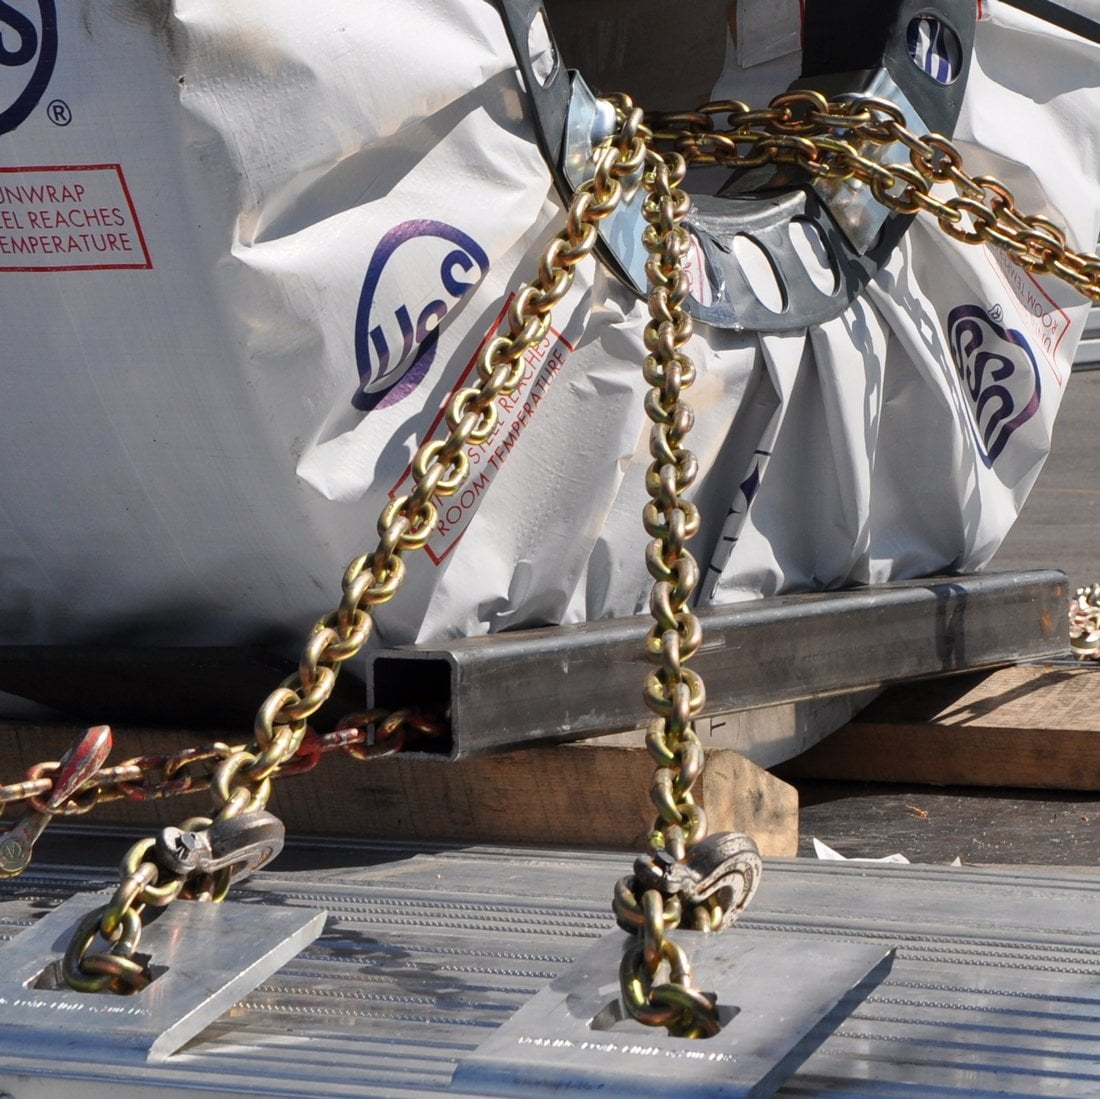 11,300 Pound Safe Working Load VULCAN Grade 70 Safety/Binder Chain with Clevis Grab Hooks 1/2 Inch x 10 Foot 